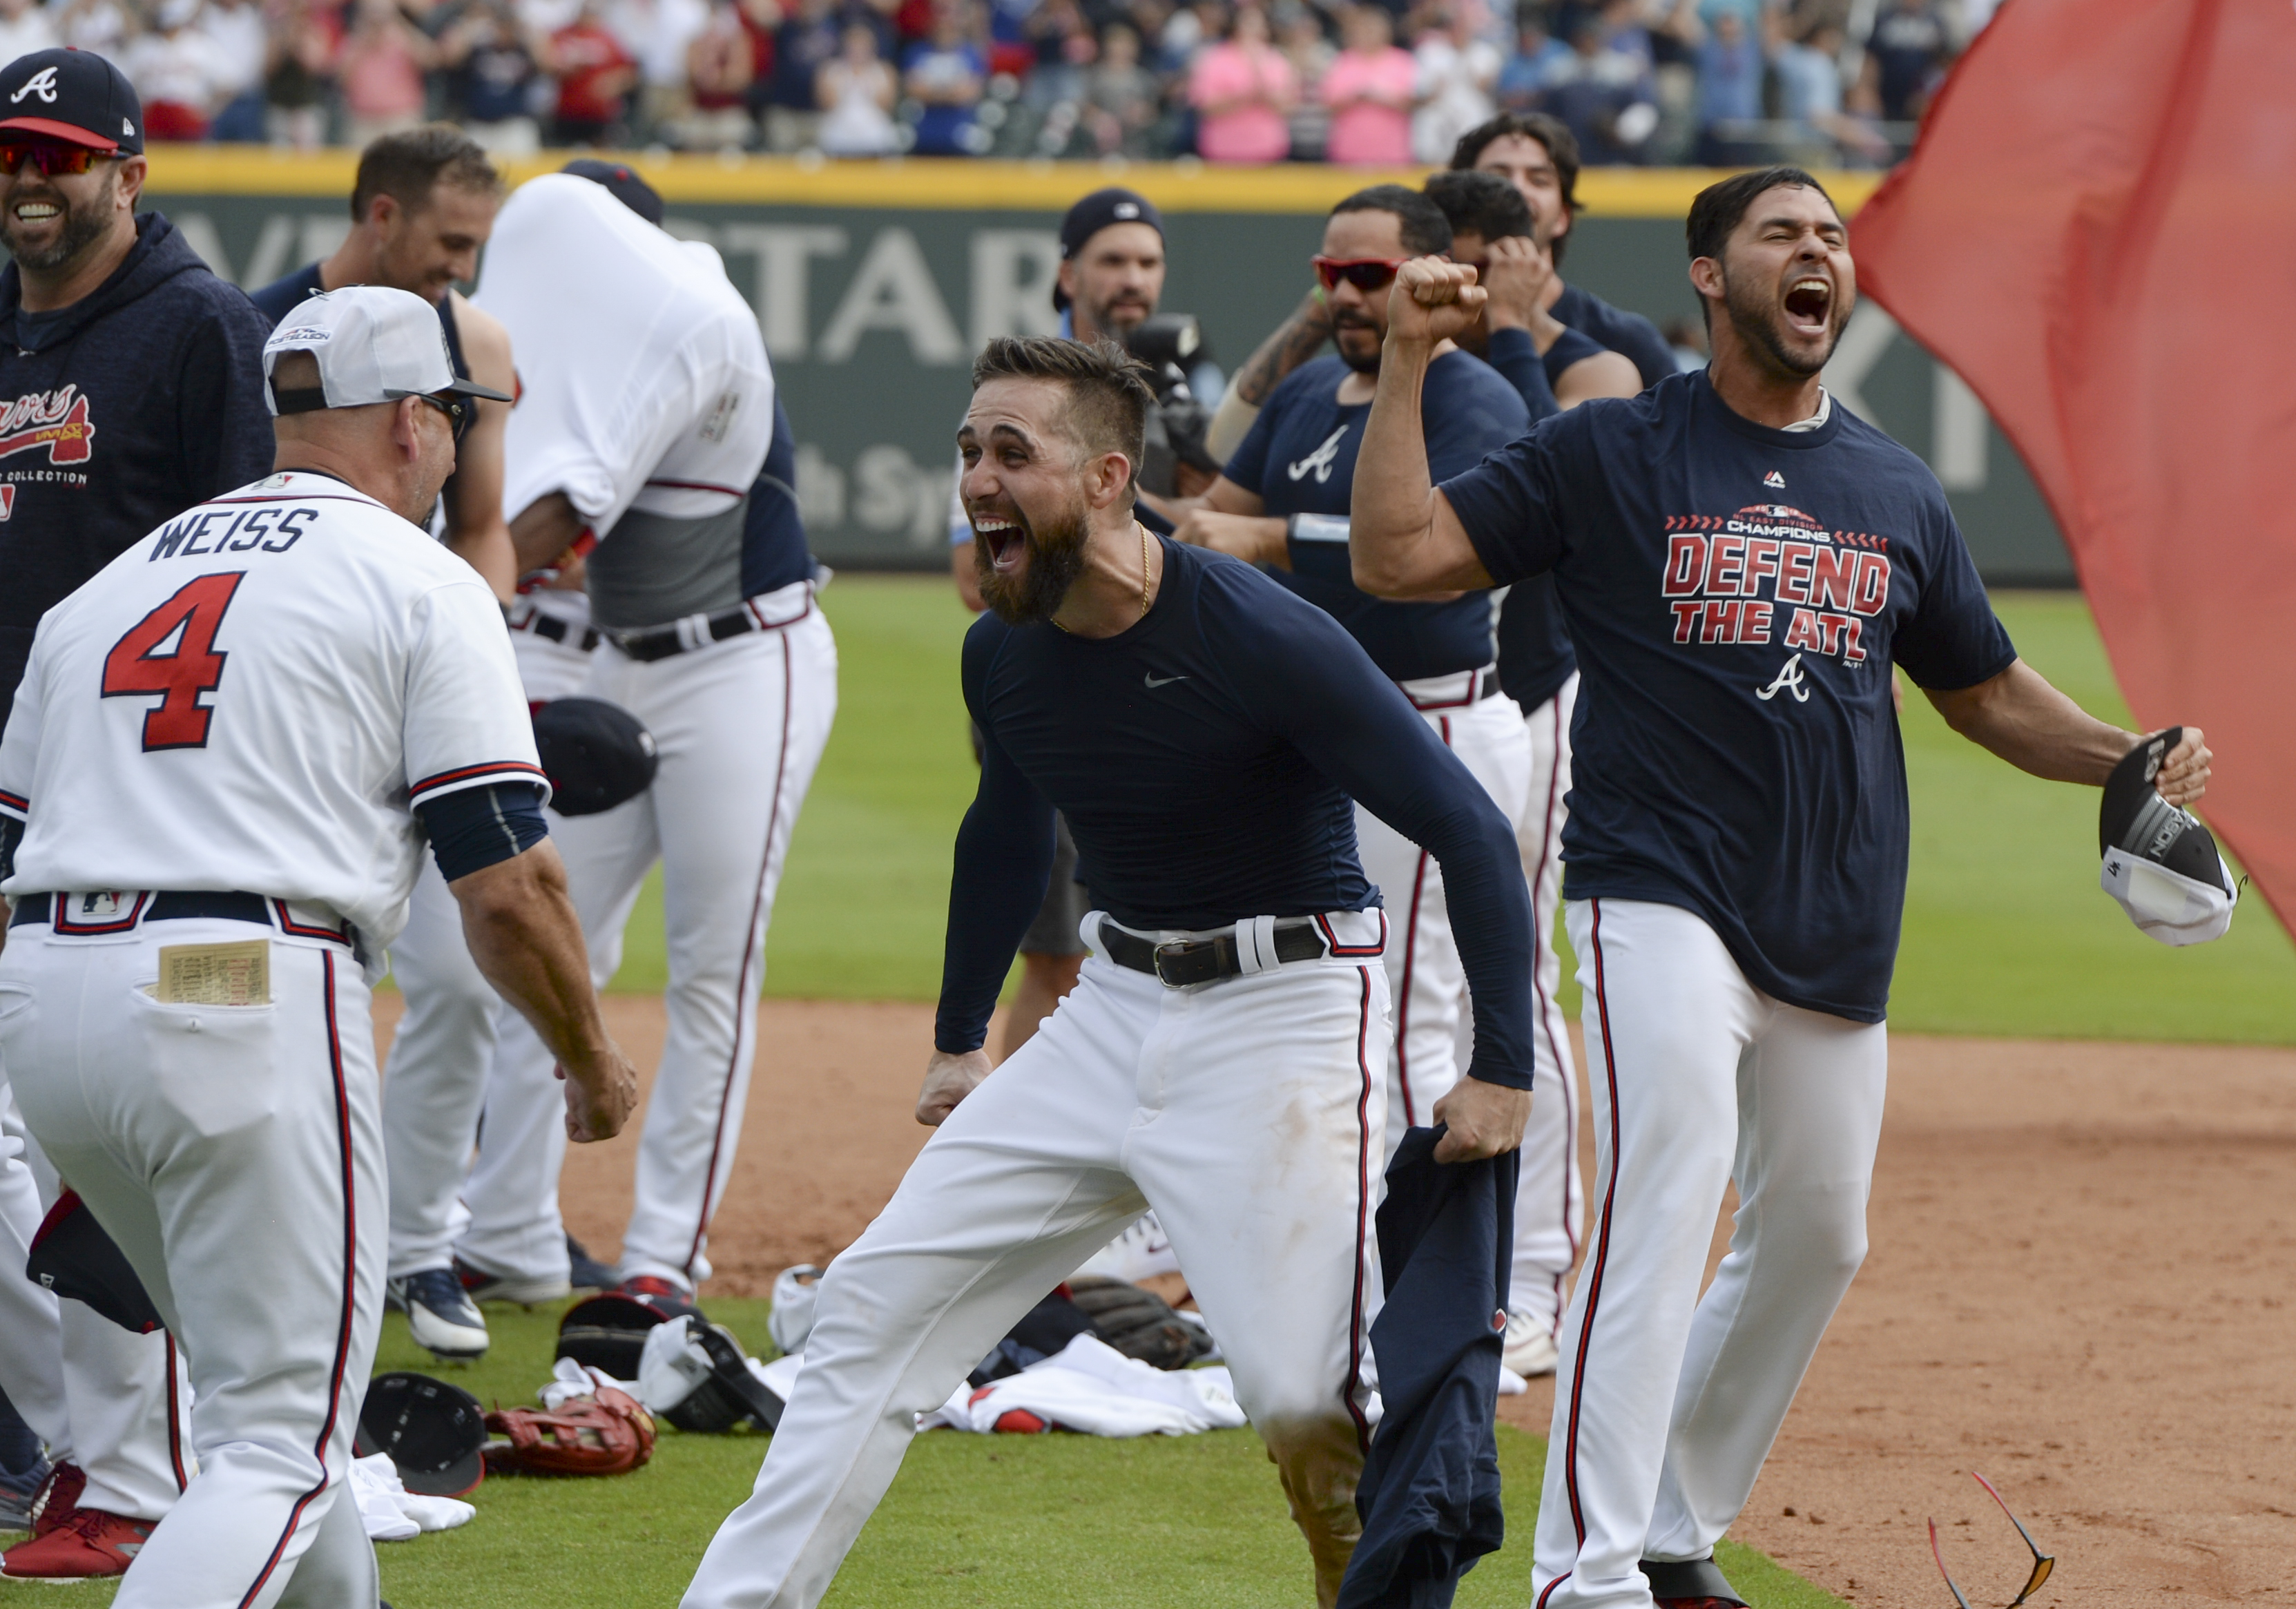 Braves players ready for postseason after winning NL East